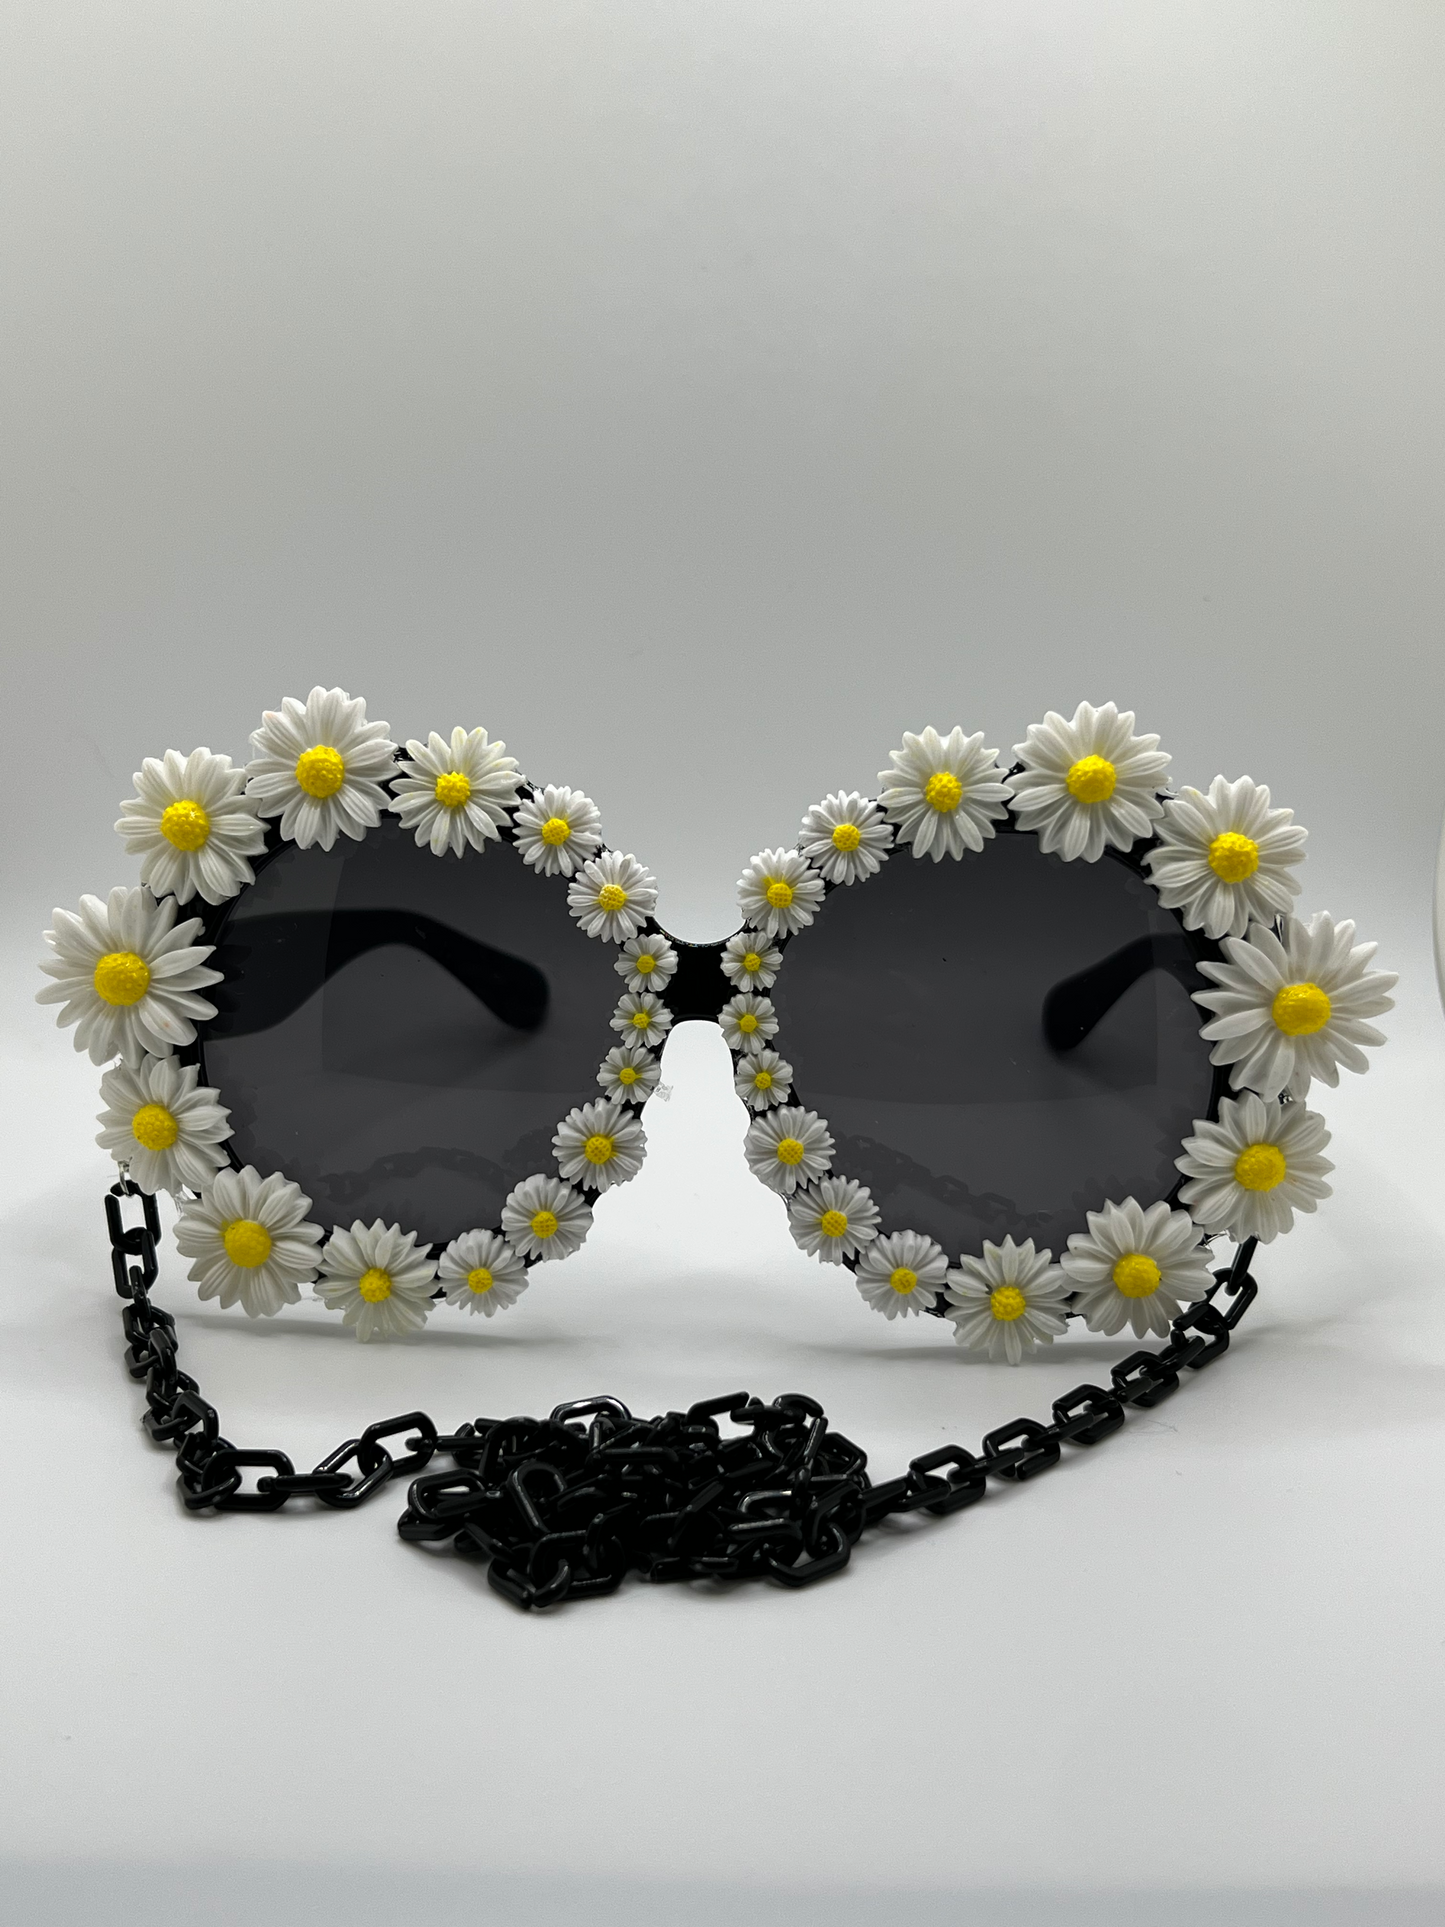 Dozens of white daisies surround these round, oversized sunglasses and are accompanied by an adjustable and removable eyewear chain.